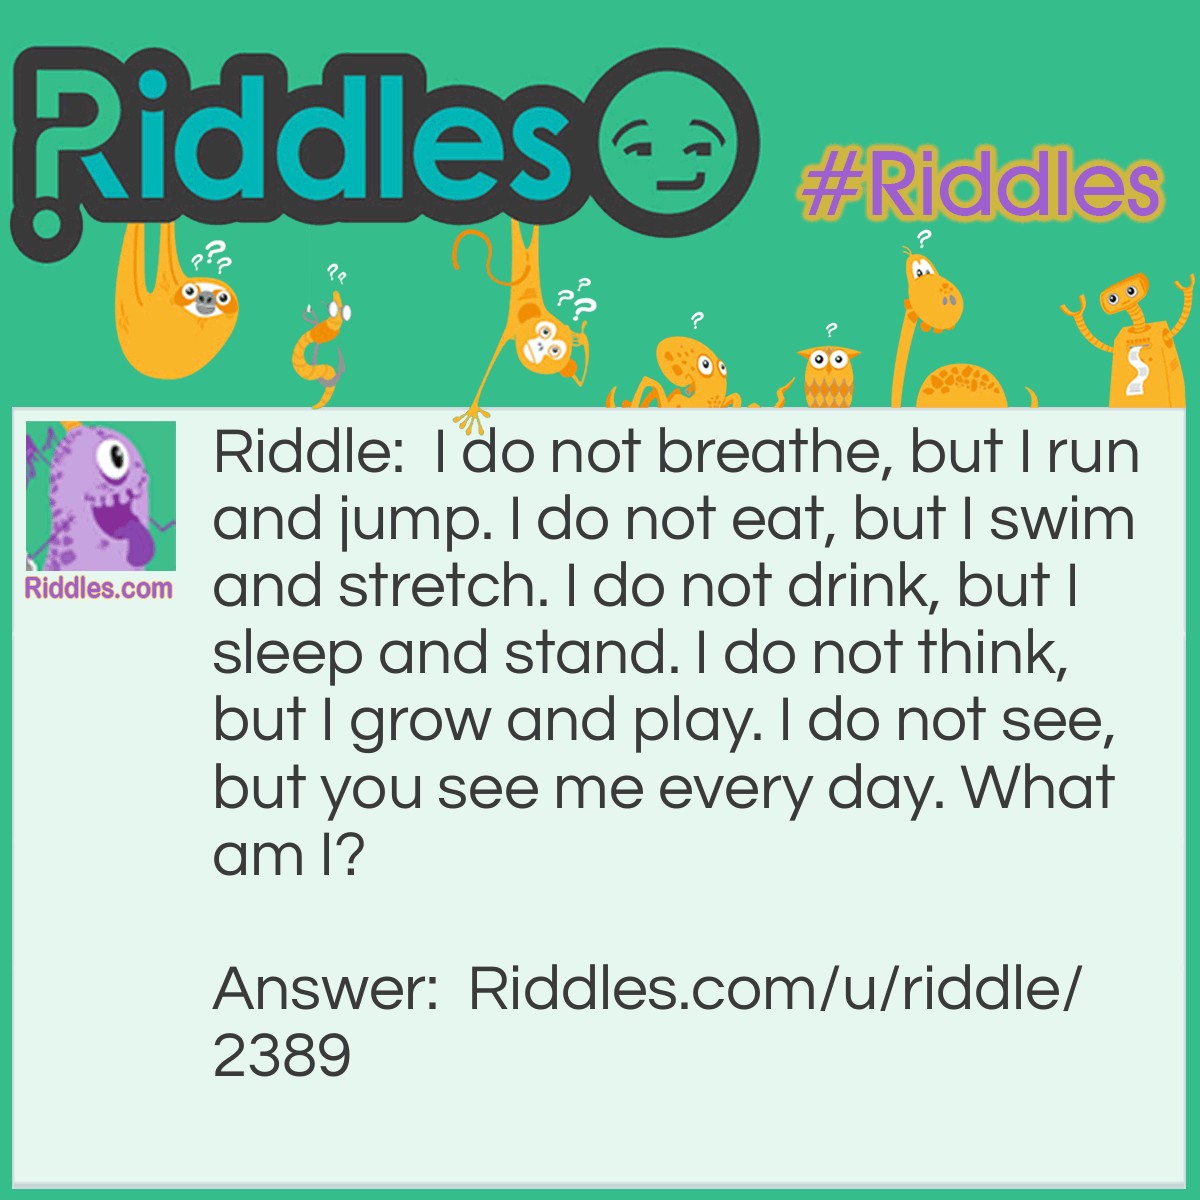 Riddle: I do not breathe, but I run and jump. I do not eat, but I swim and stretch. I do not drink, but I sleep and stand. I do not think, but I grow and play. I do not see, but you see me every day. What am I? Answer: A leg (still attached to a living body, of course).